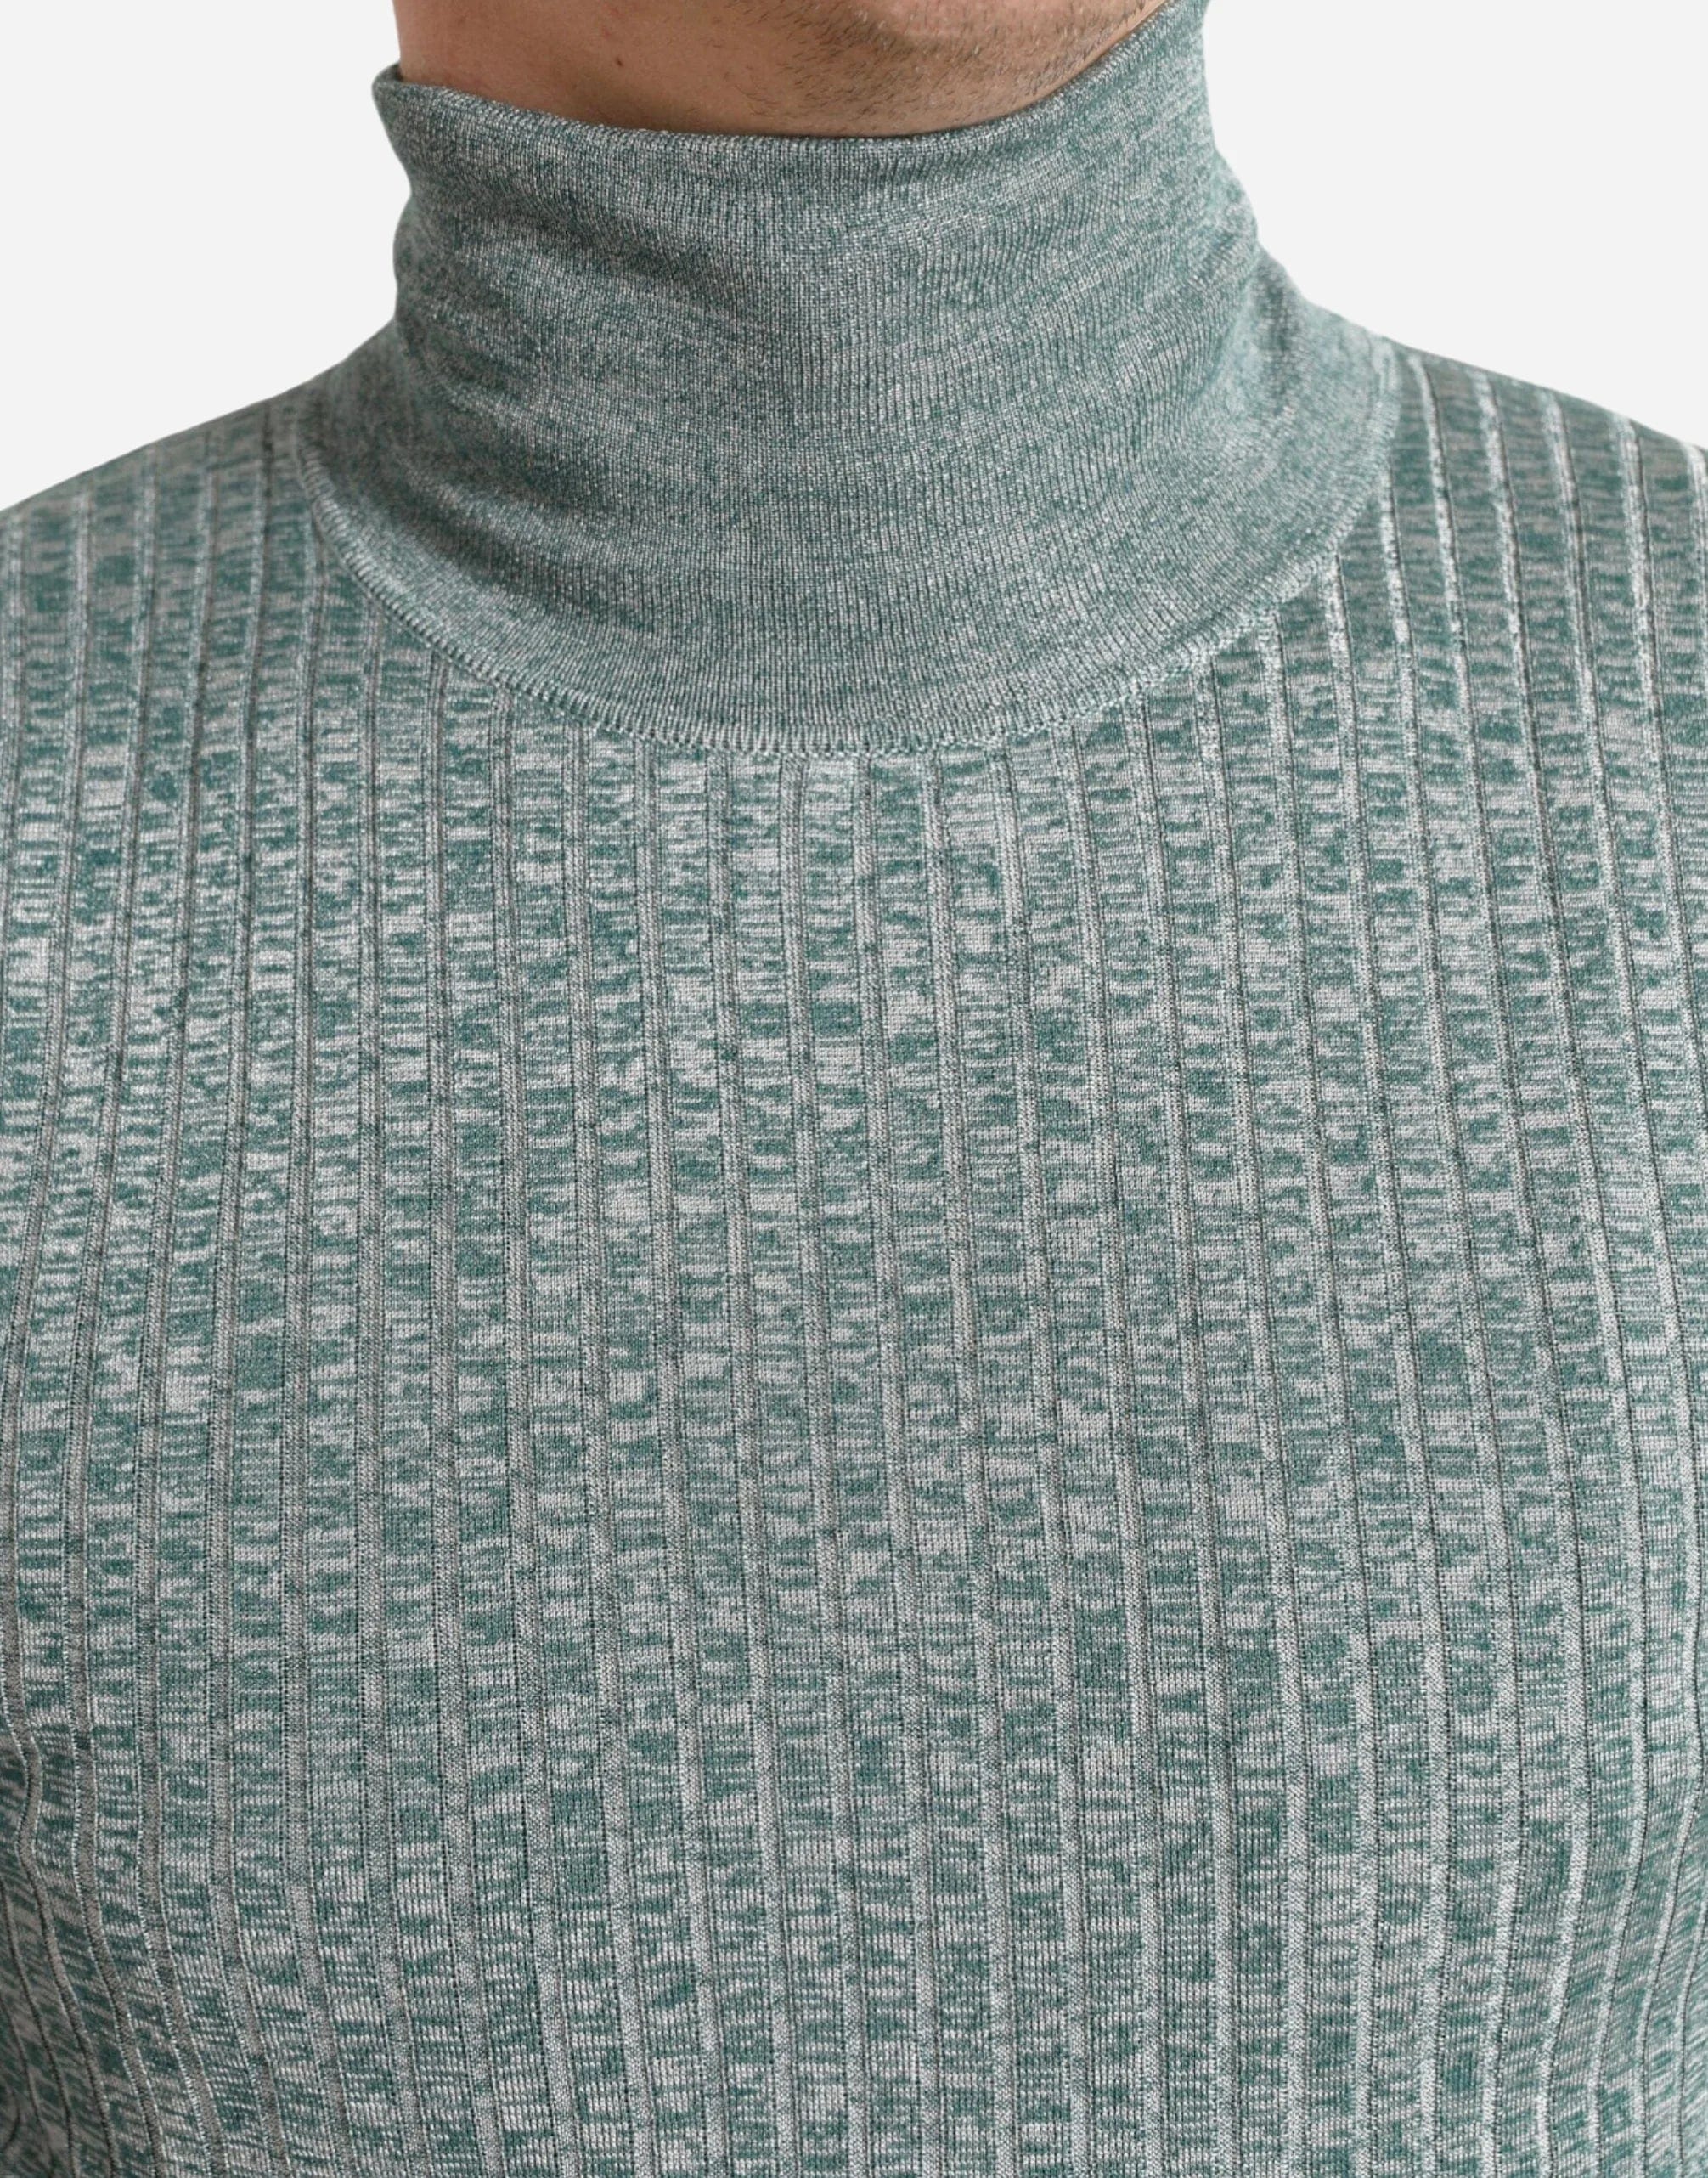 Ribbed Turtleneck Pullover Sweater